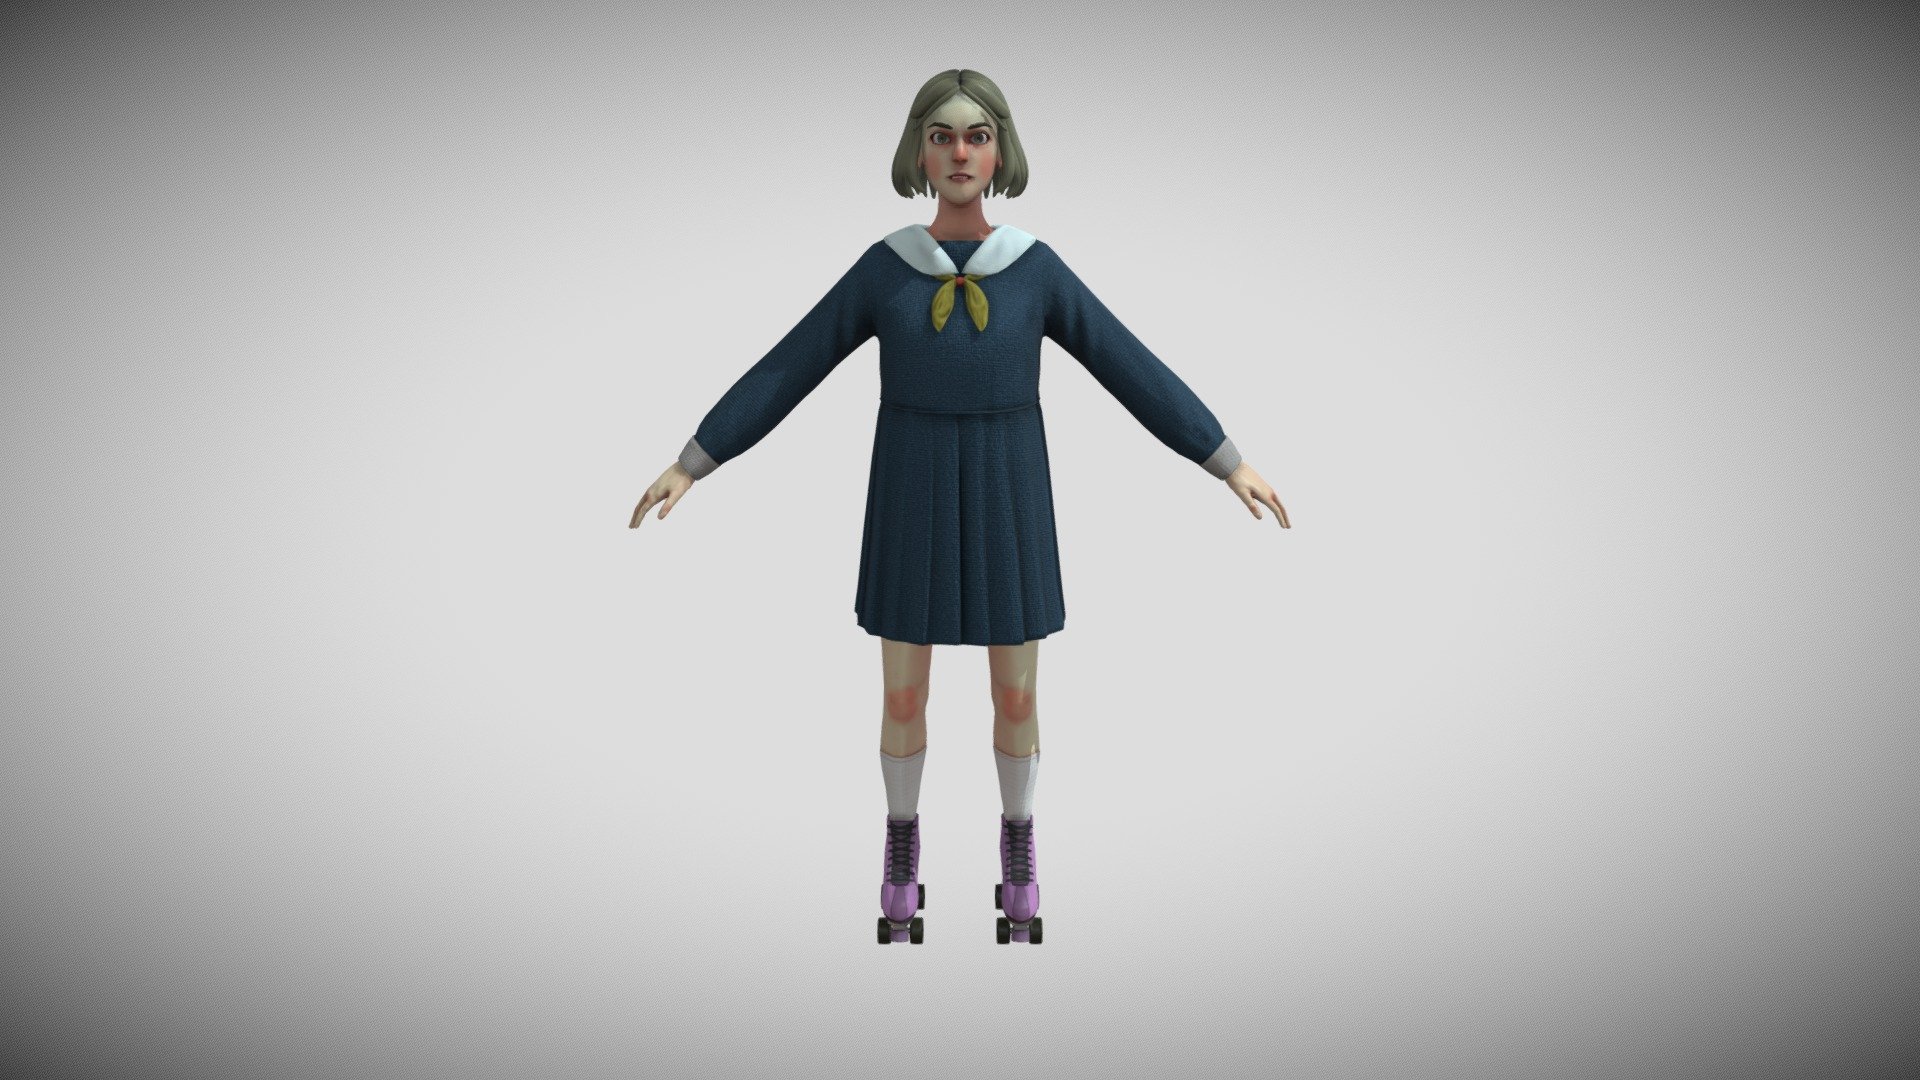 Game-ready, low-poly textured character model.
(faces: 19750, triangles: 38 698);

Includes 3d model in fbx and OBJ format and textures in png format (texture sizes: 4096 x 4096 (base color, metallic, normal, roughness) 3d model